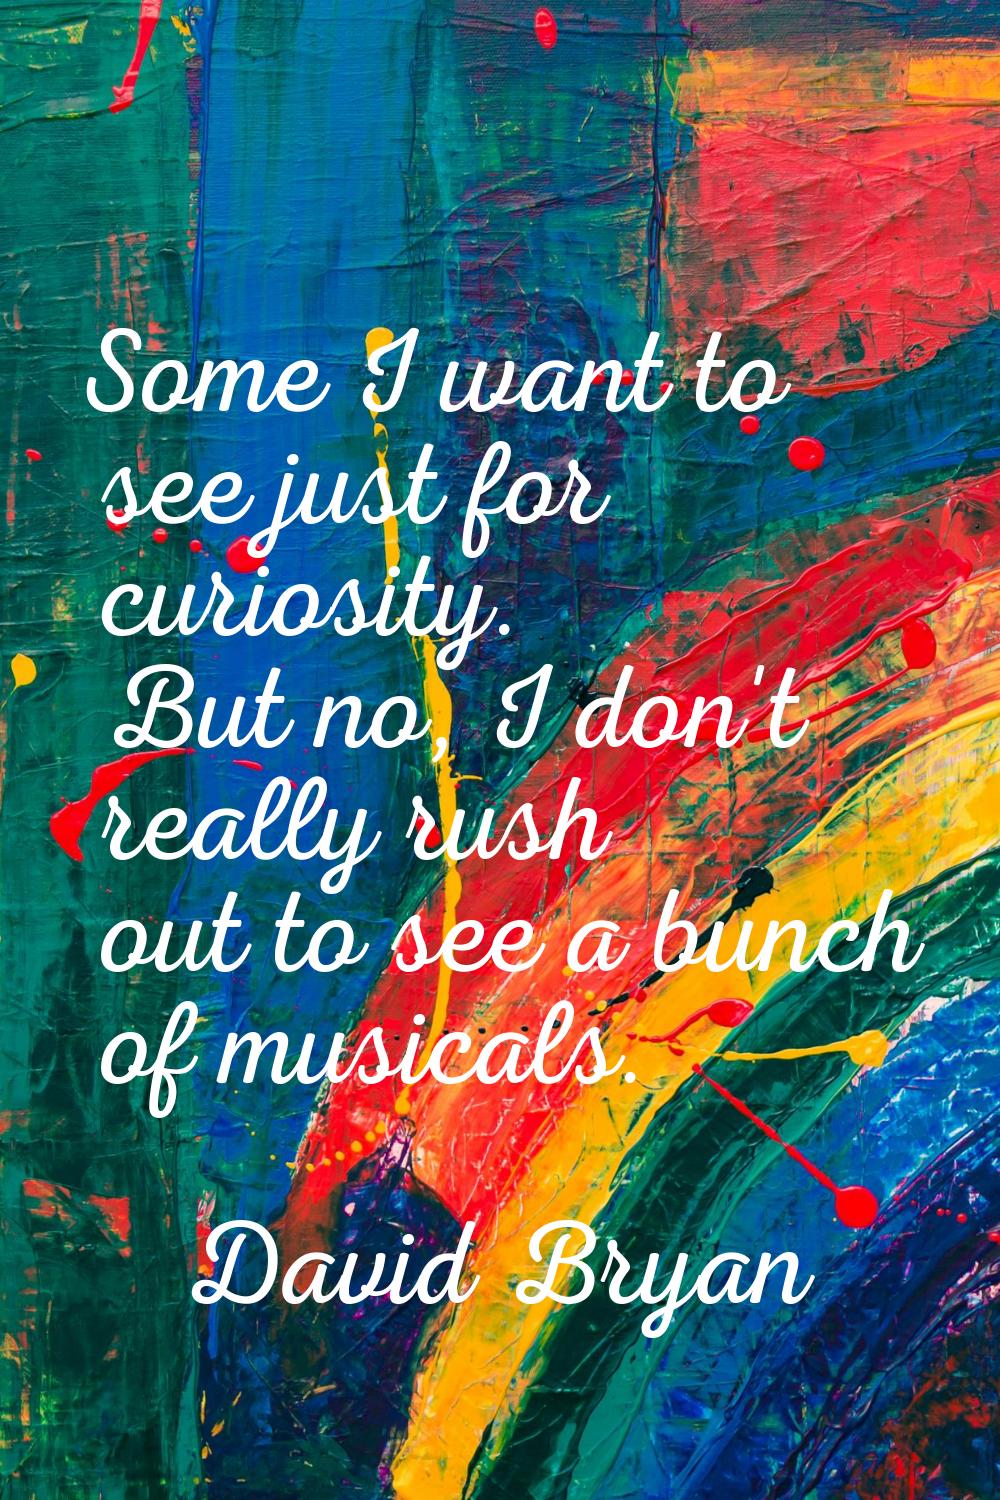 Some I want to see just for curiosity. But no, I don't really rush out to see a bunch of musicals.